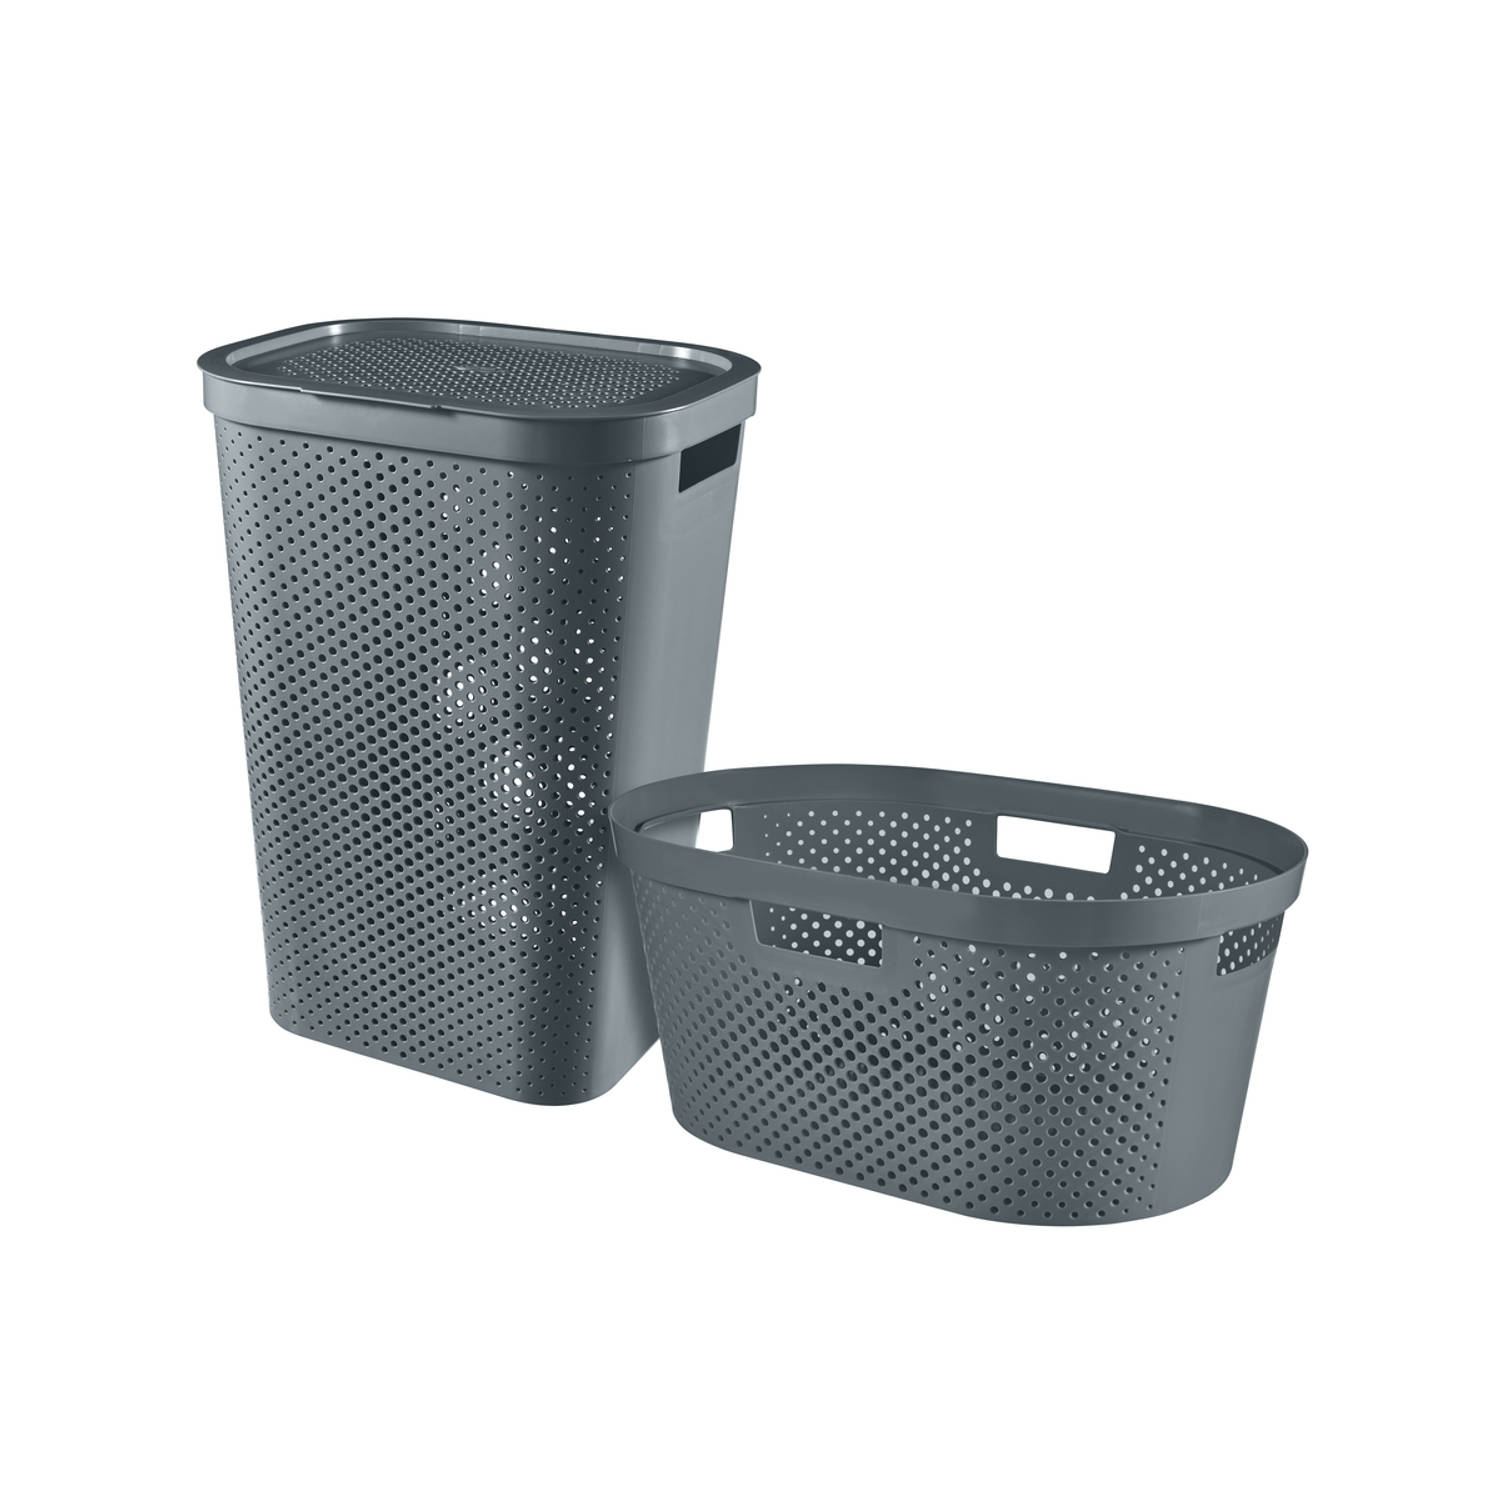 Curver Infinity Recycled Wasmand Met Deksel 60l + Wasmand 40l Antraciet